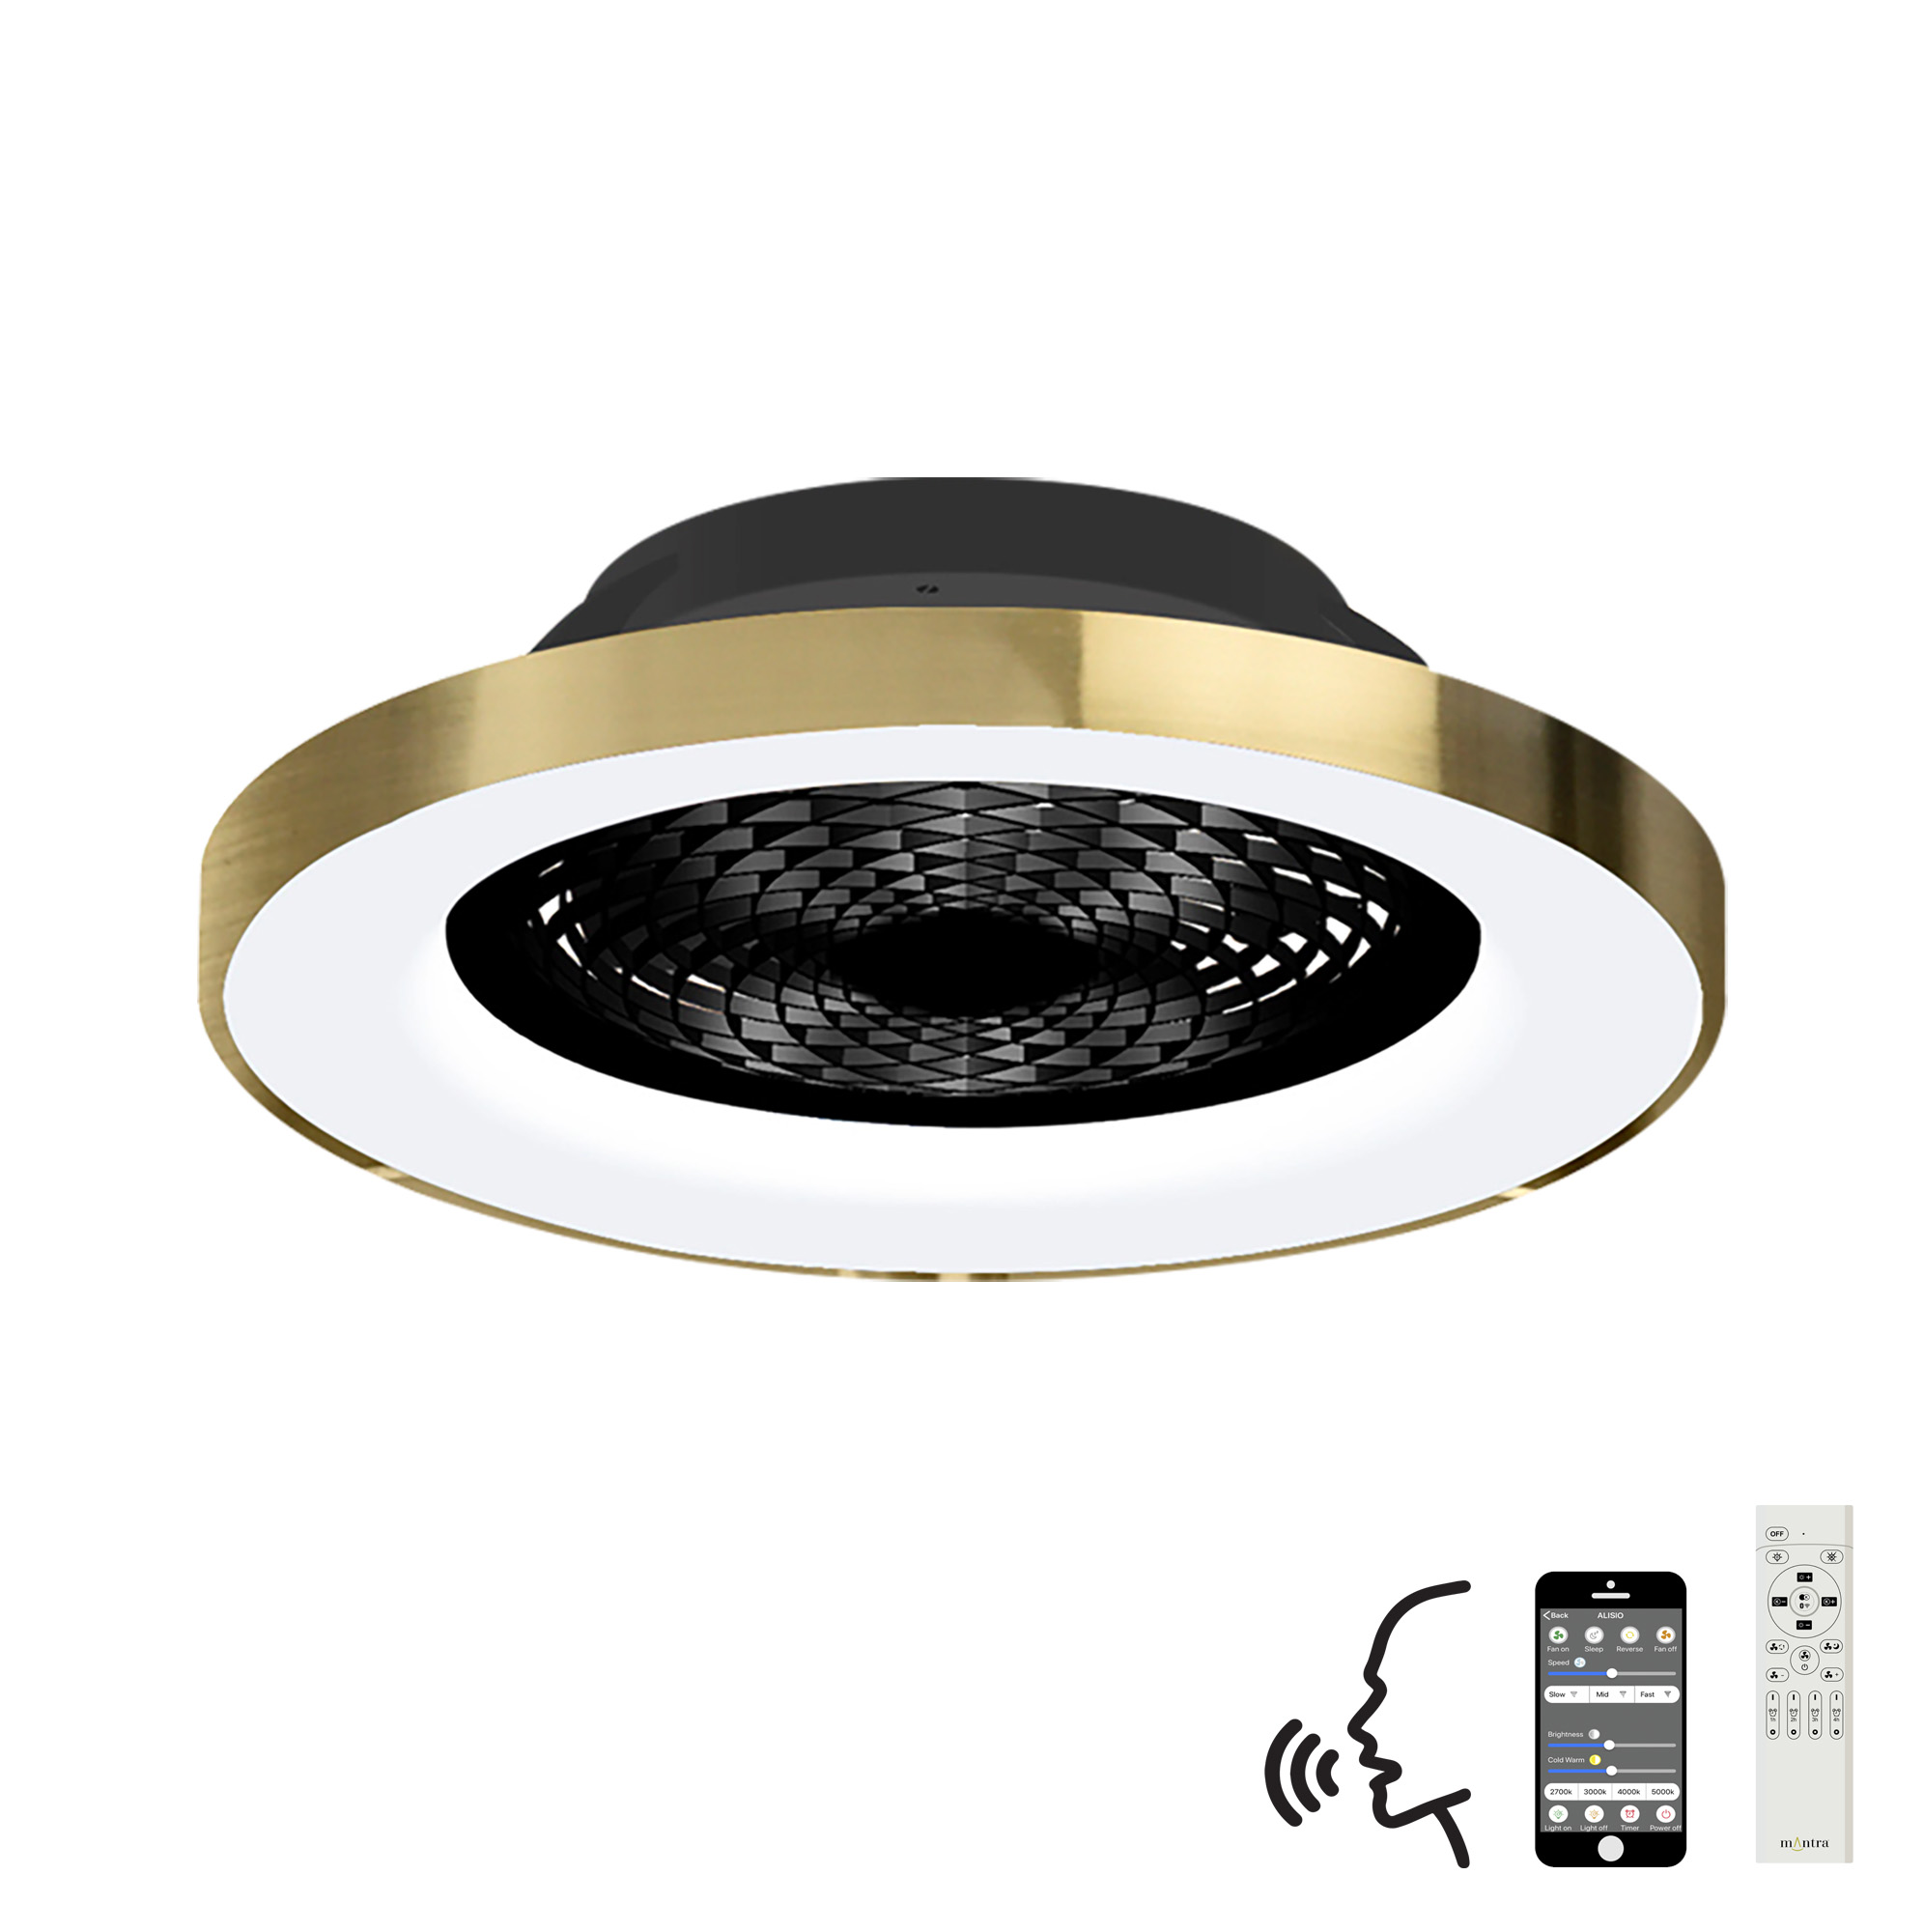 M7124  Tibet 70W LED Dimmable Ceiling Light & Fan, Remote / APP / Voice Controlled Gold